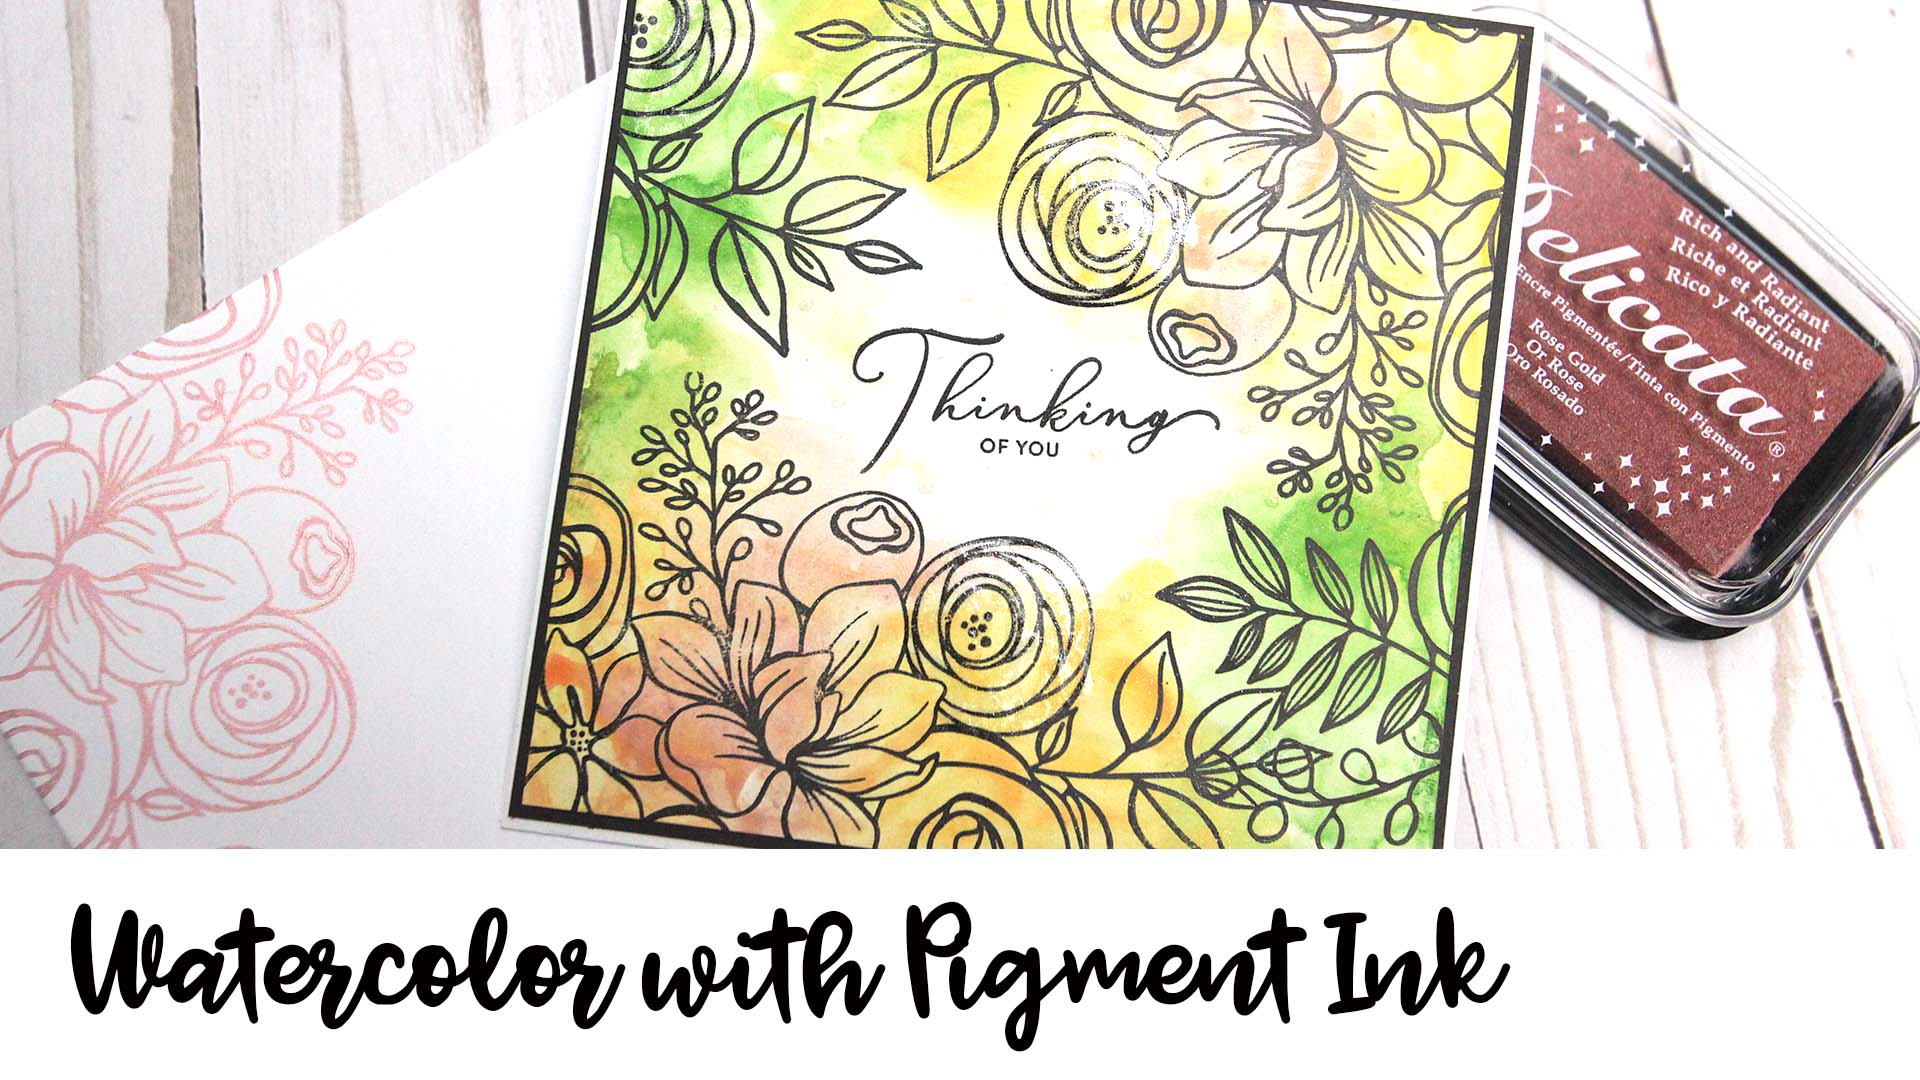 Handmade thinking of you card featuring watercolored floral images.